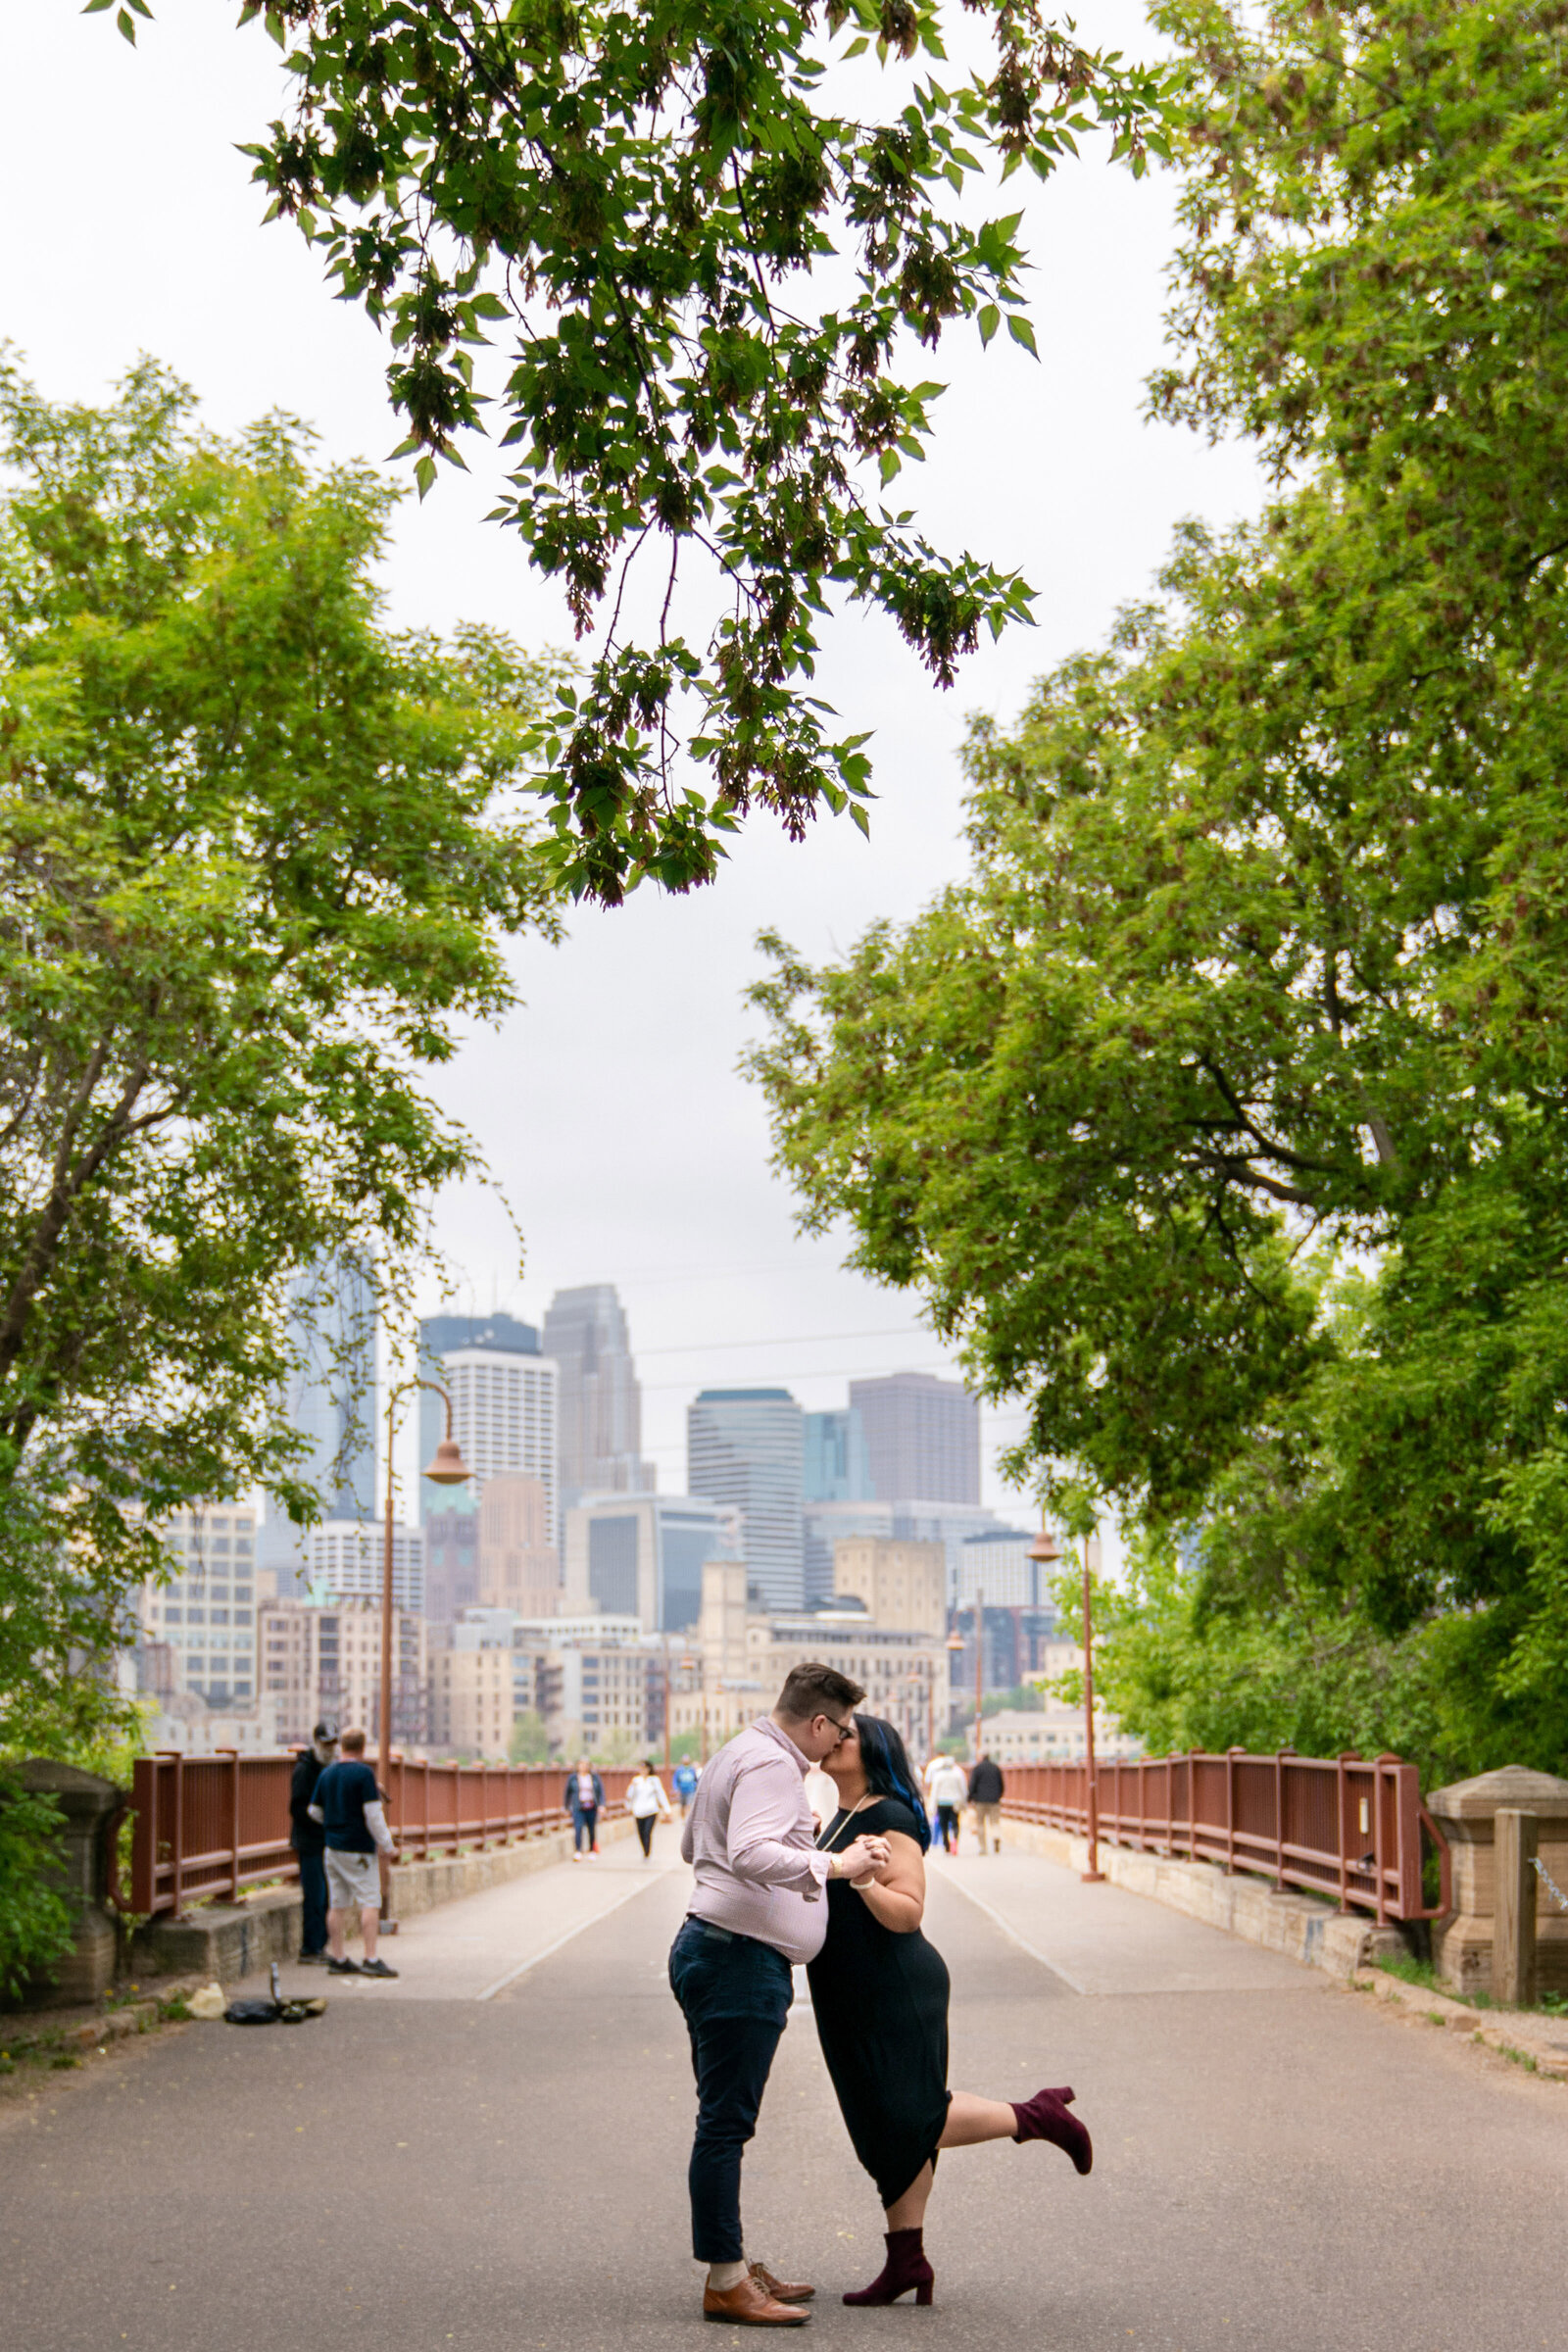 Man and woman kiss in front of the Stone Arch Bridge in Minneapolis, Minnesota.